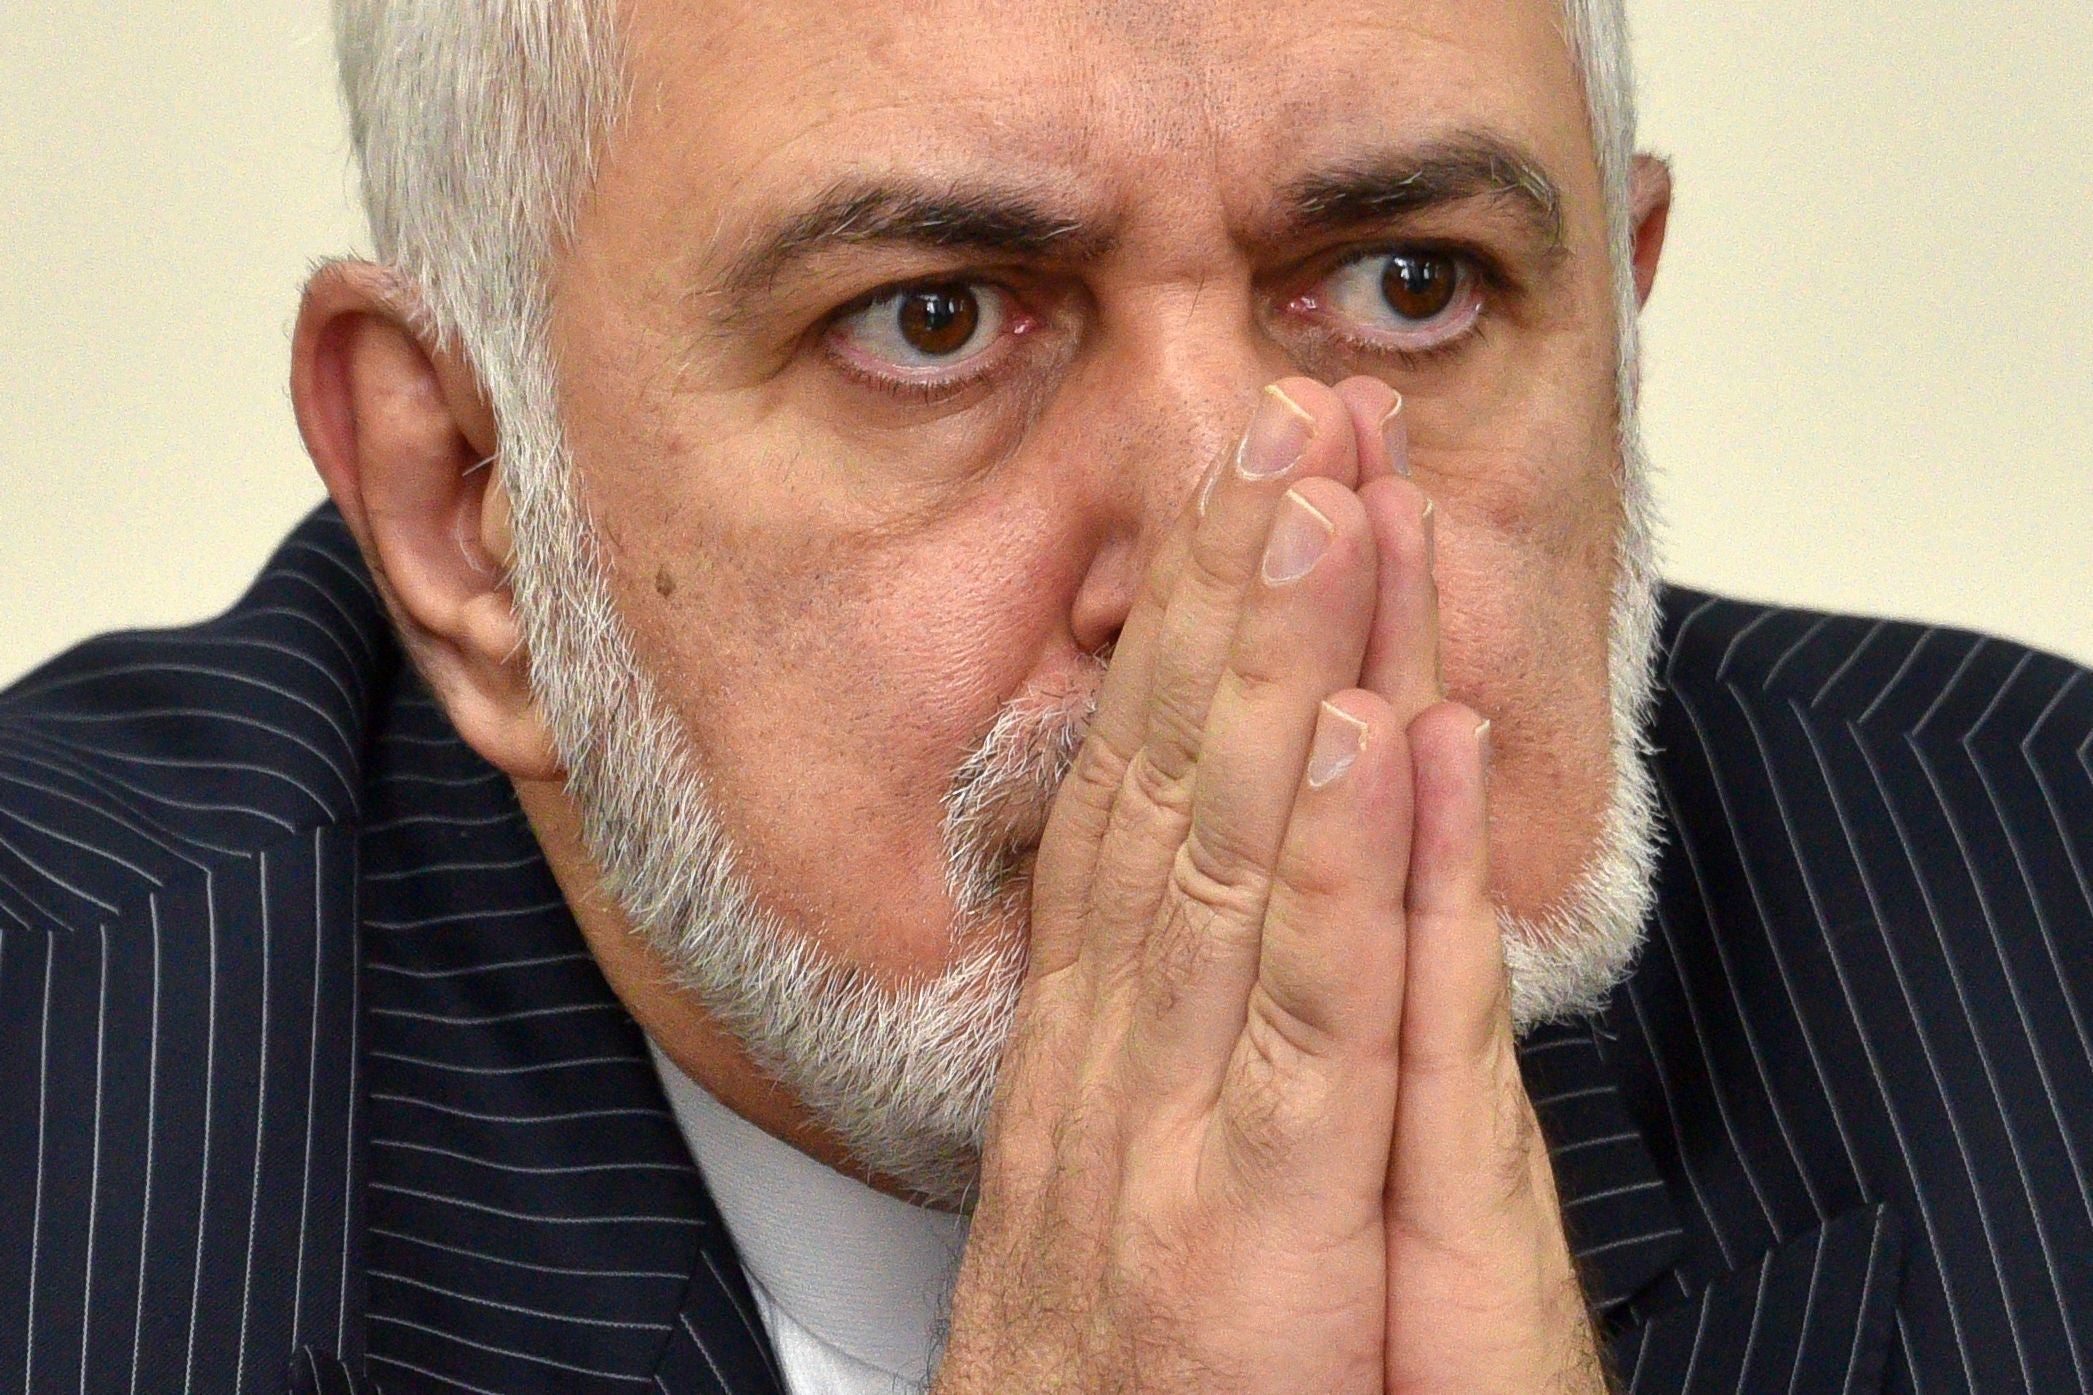 Iranian foreign minister Mohammad Javad Zarif’s spokesperson has asked for sanctions to be lifted